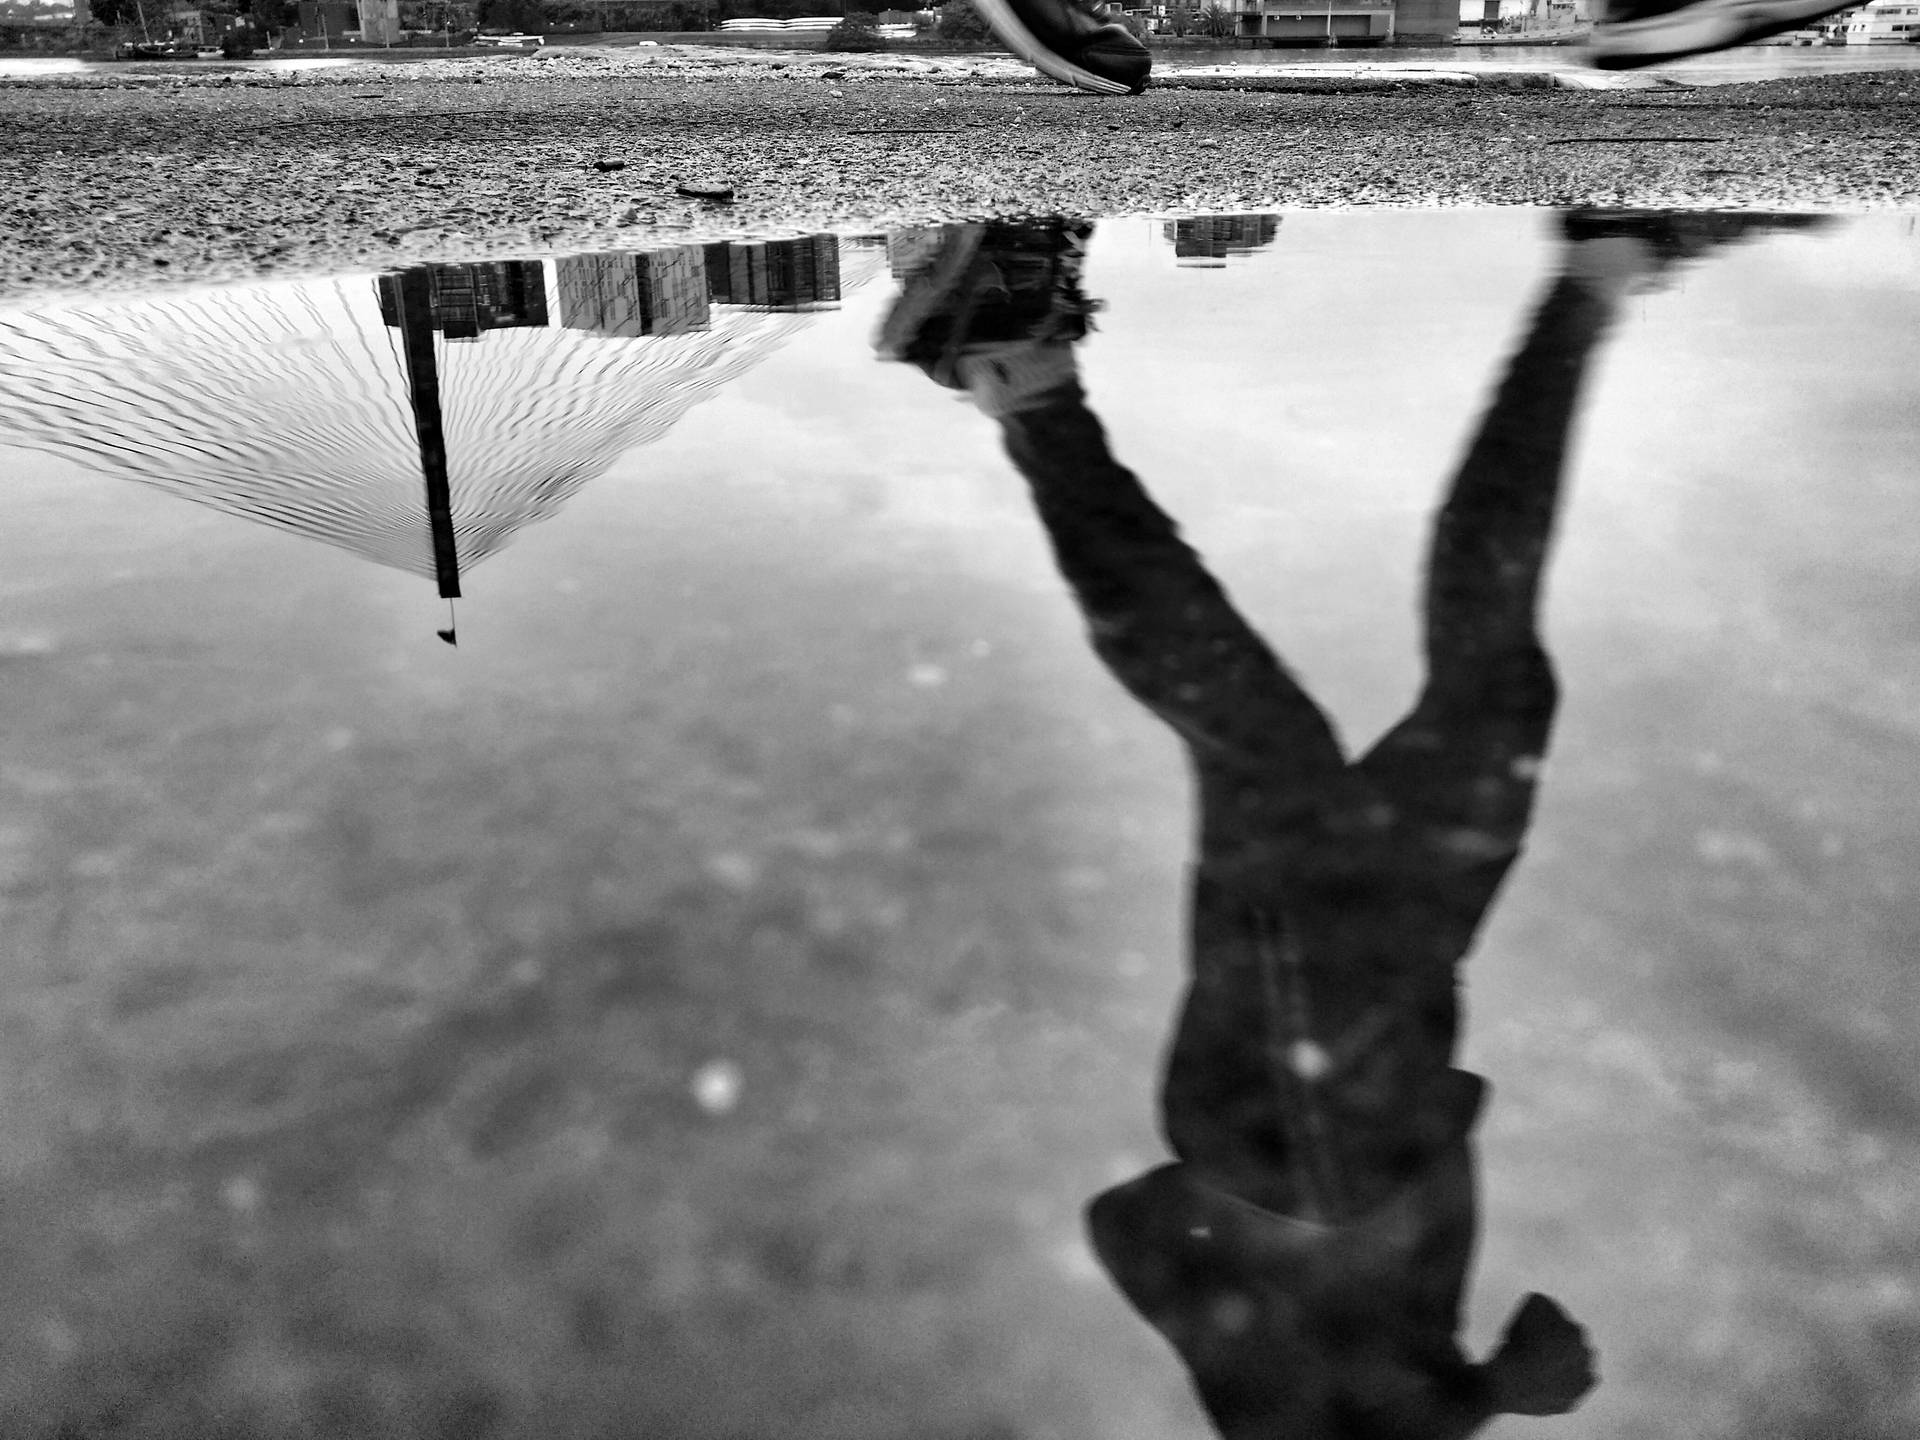 Runner's Reflection On Water Background